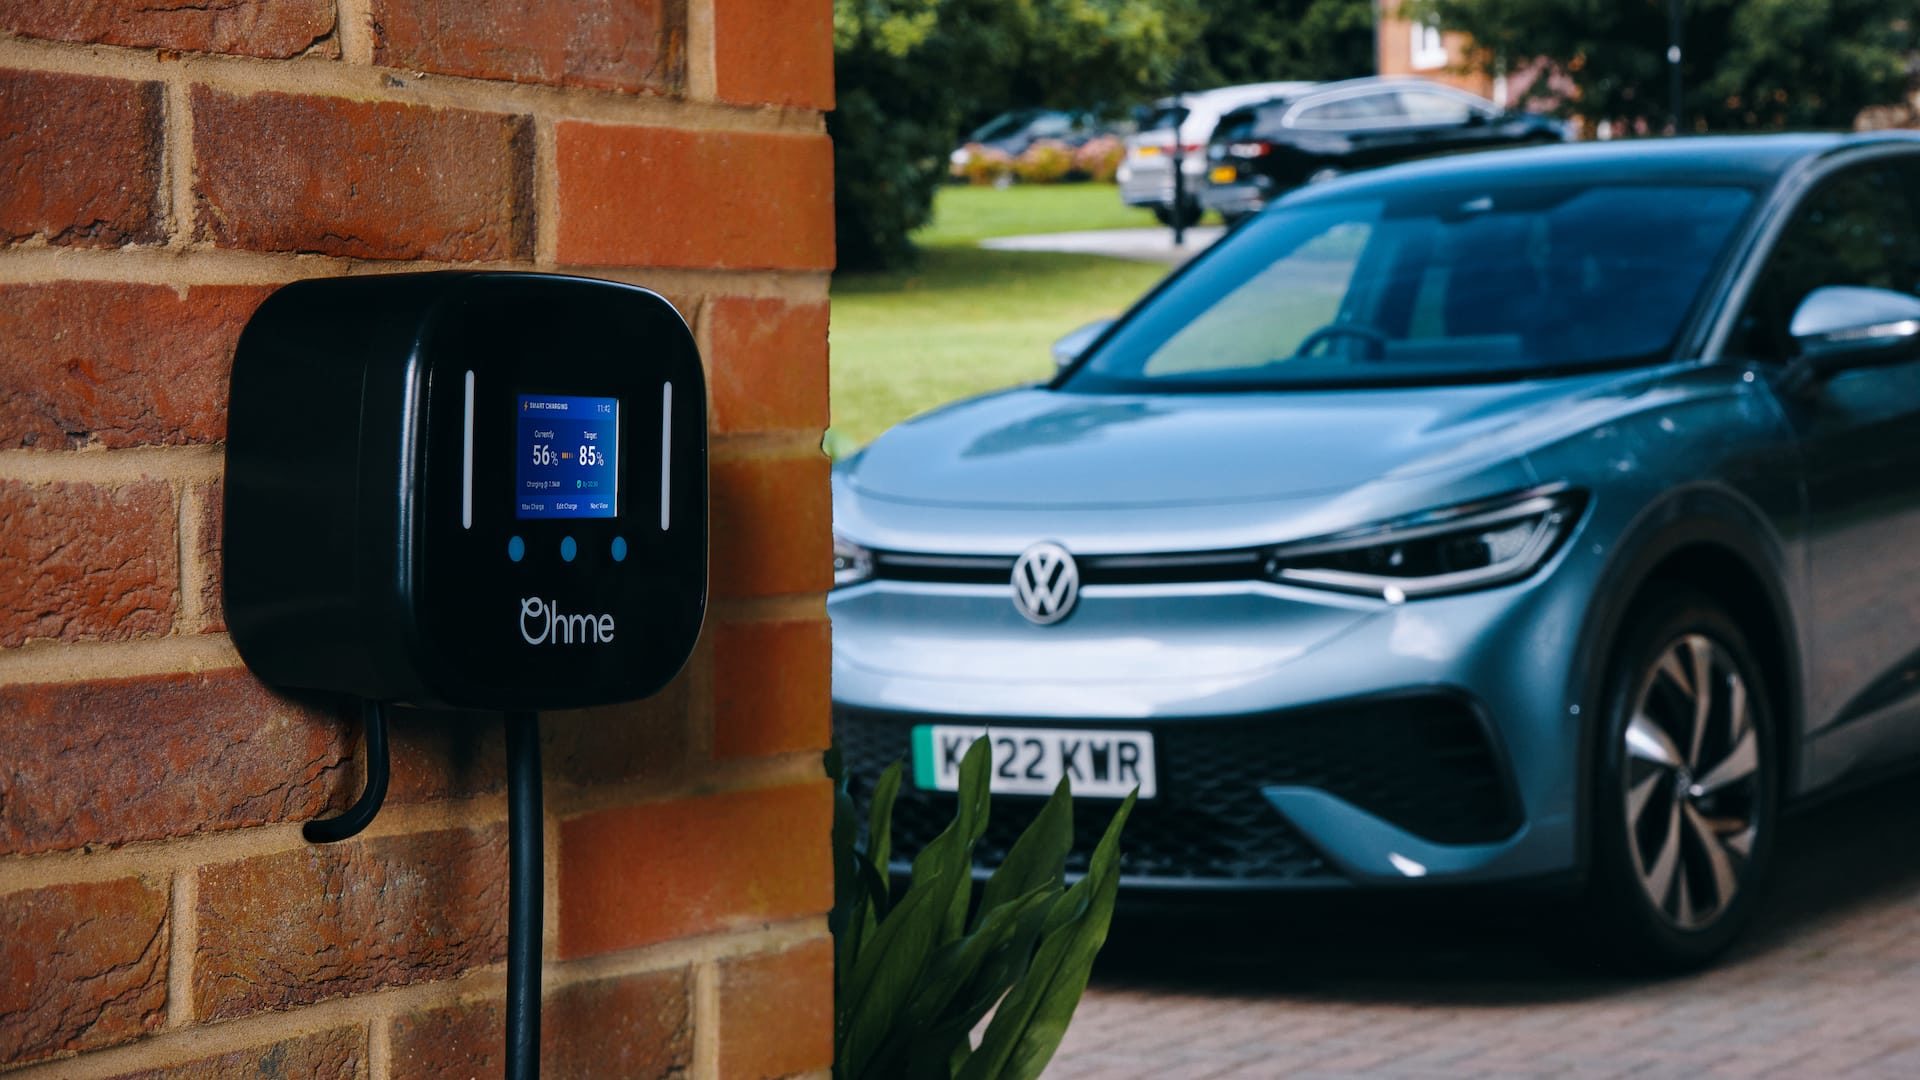 Electric vehicle charging prices rise